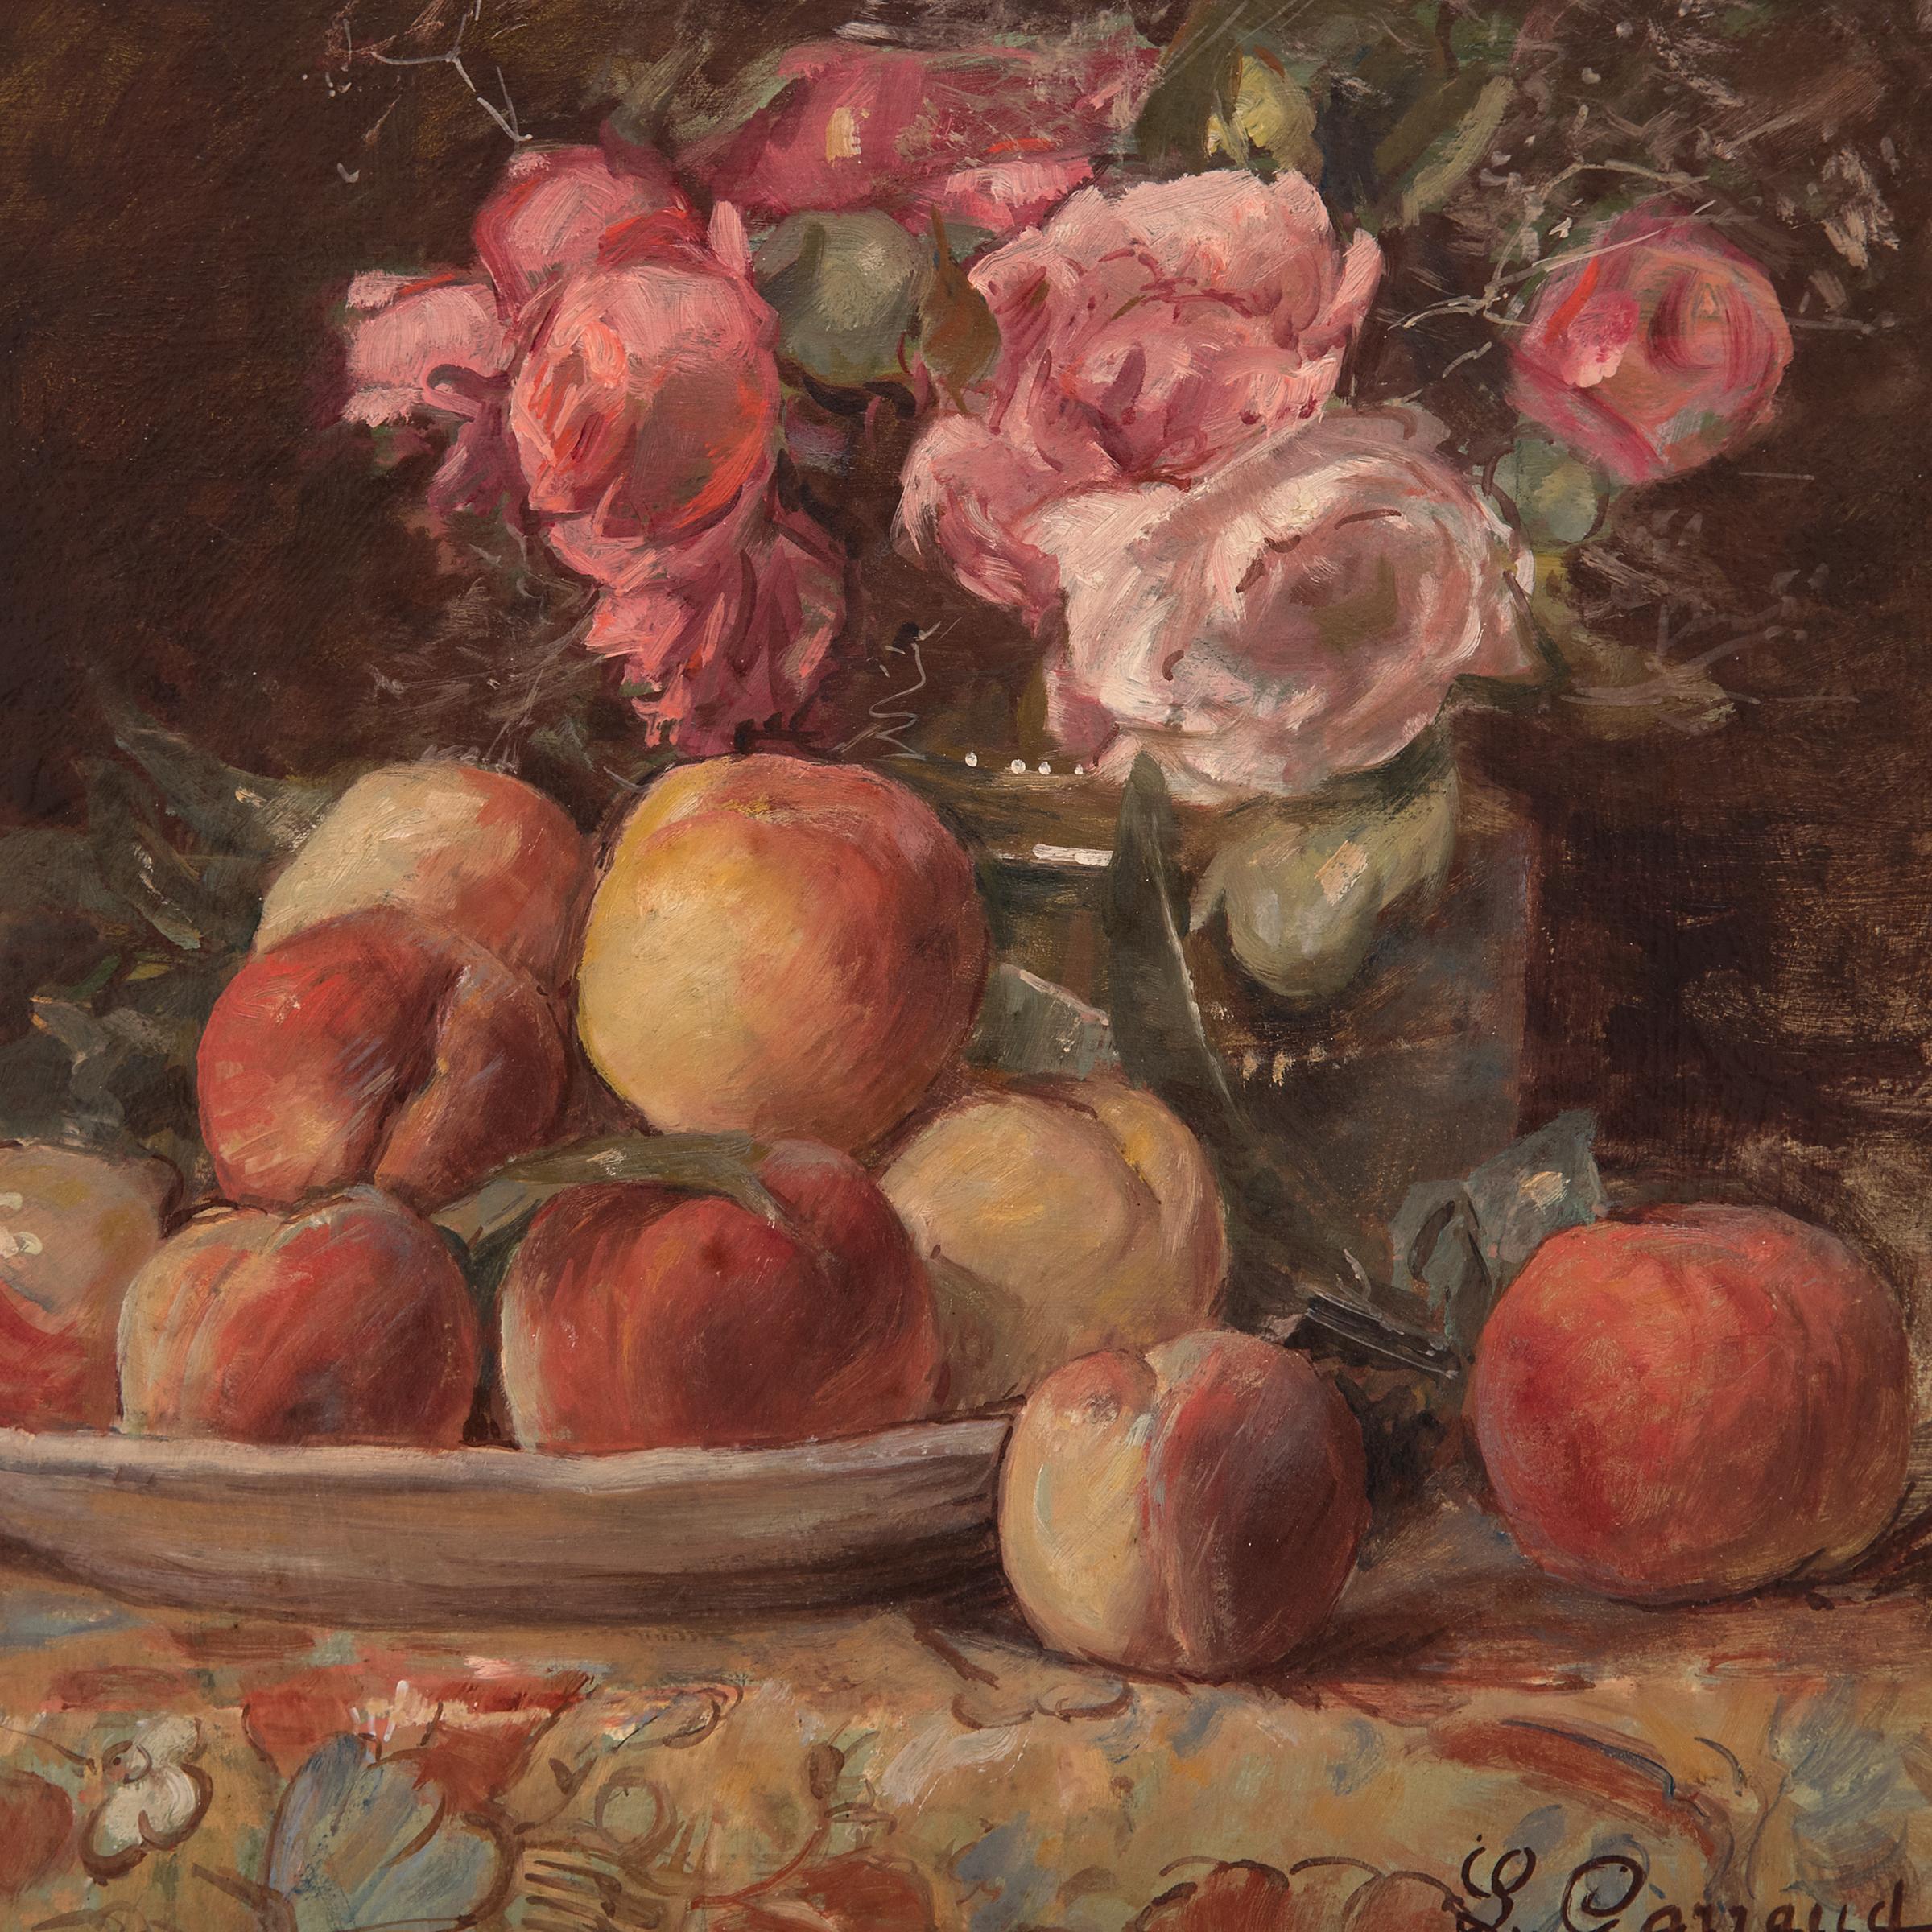 This impressionist still life by French painter Léon Garraud depicts a table set with a plate of peaches and a vase of pink peonies and delicate white flowers. The warm palette of oranges, yellows, and pinks creates the perception of daylight